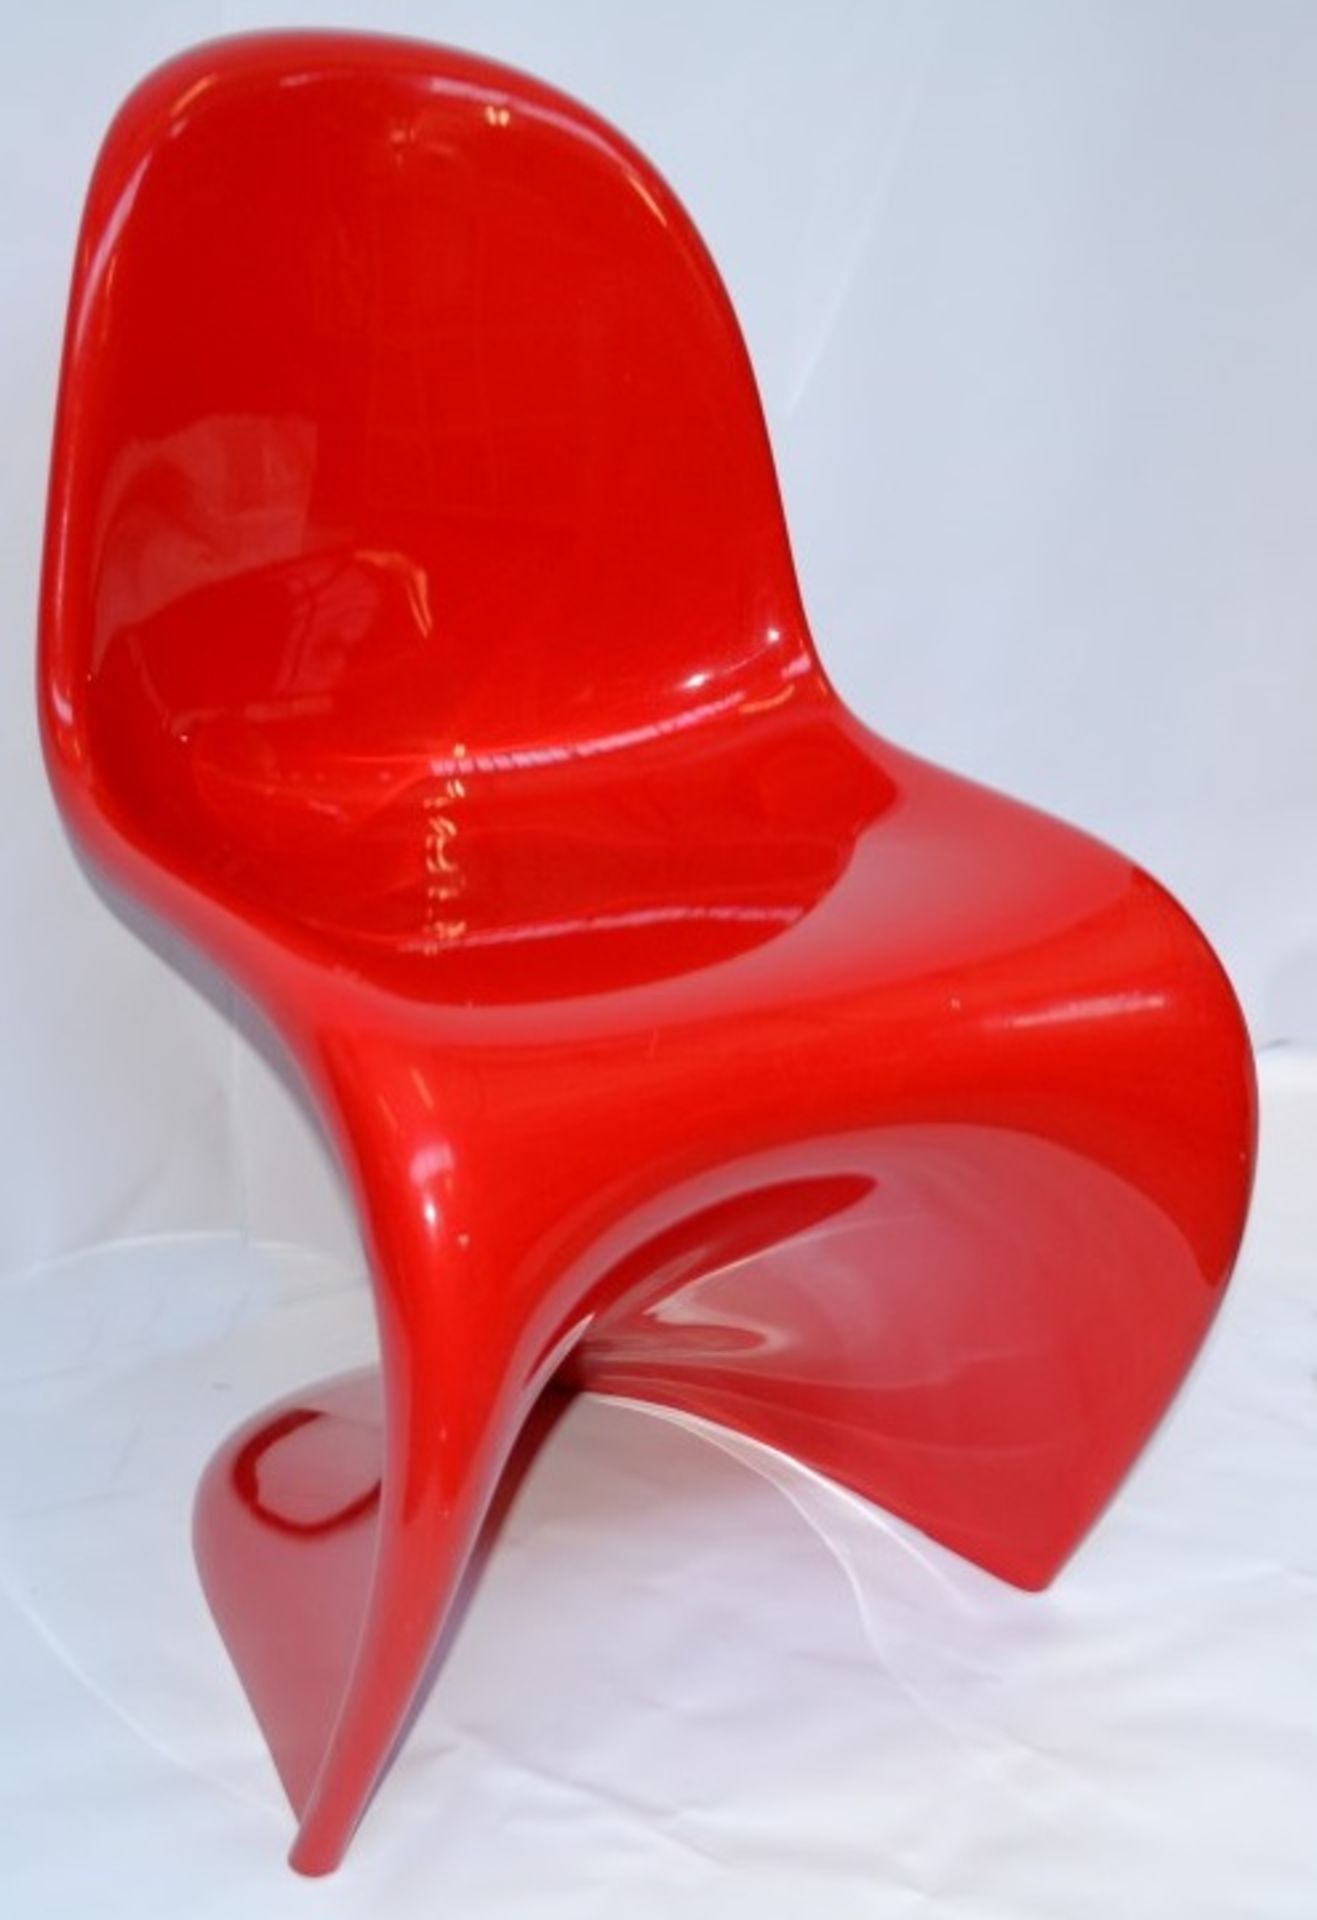 1 x VITRA Panton Chair In Classic Red - Measurements: W50 x D60 x H83cm, Seat Height: 41cm - - Image 5 of 8